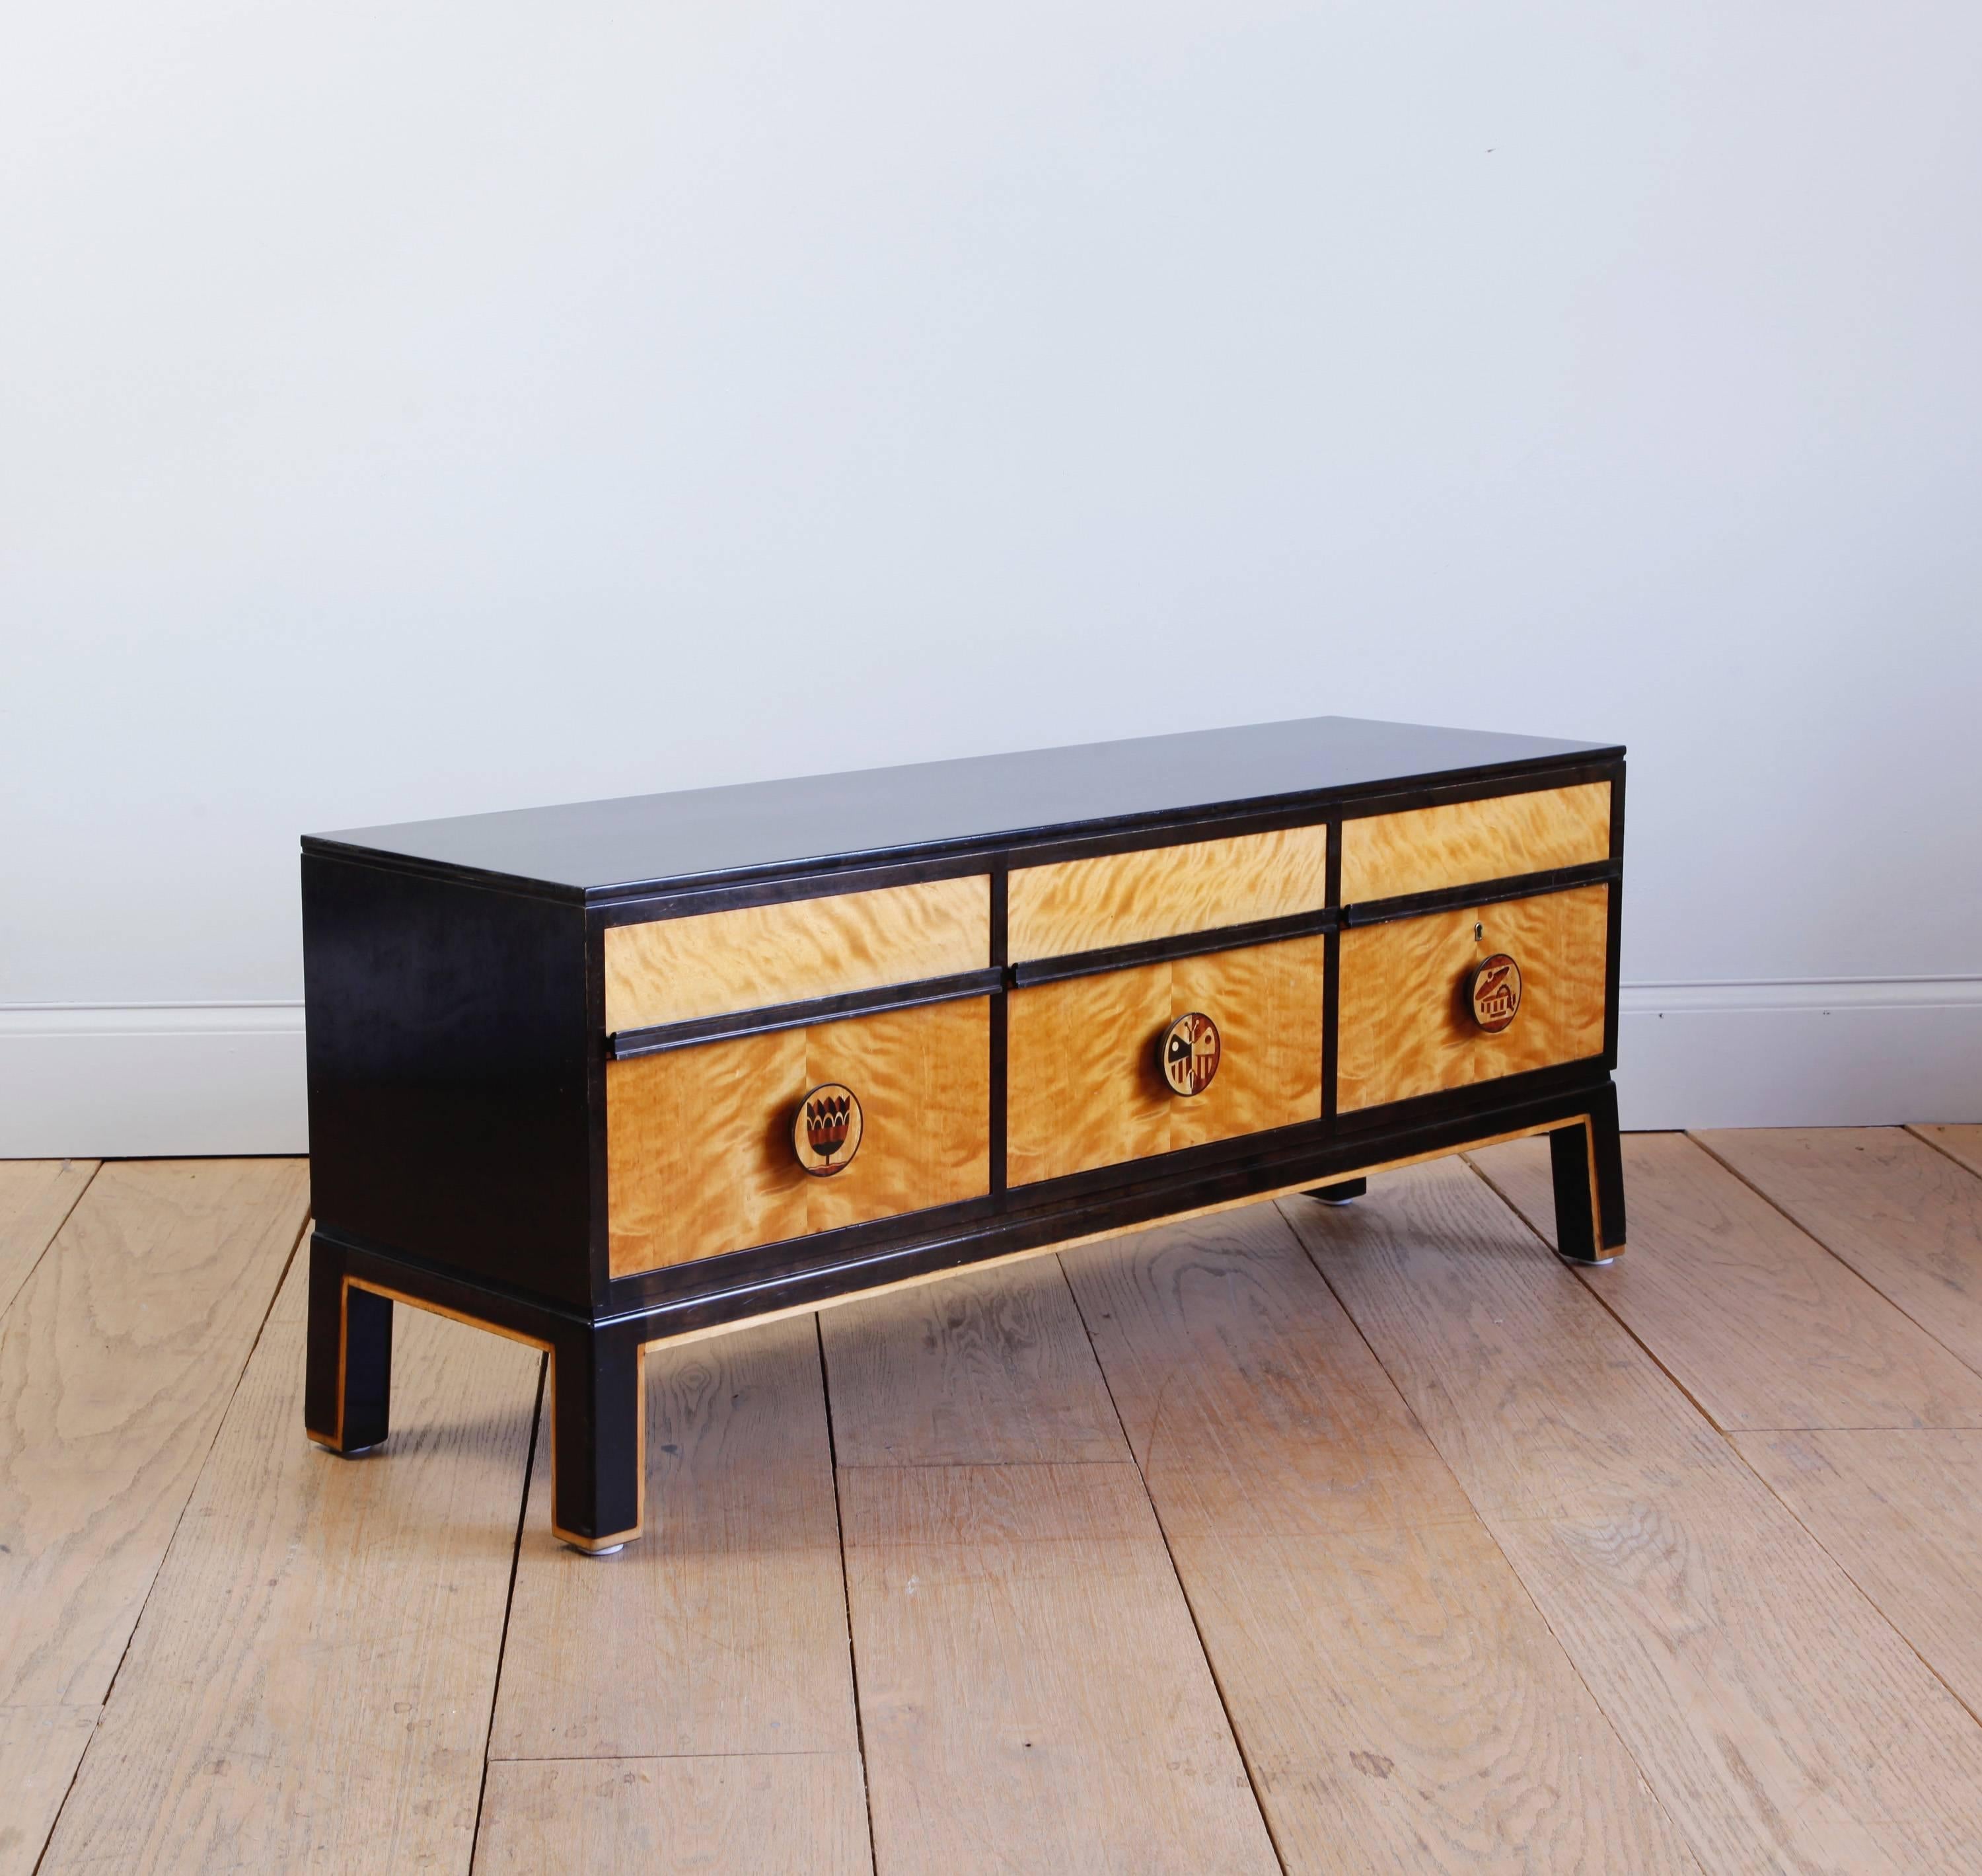 A low, six-drawer chest made of flame birch and black lacquered wood. The knobs are inlaid with various contrasting woods to create playfully elegant figures which were one of the distinctions of Schulz's creations for Boet. 

Otto Schulz was an